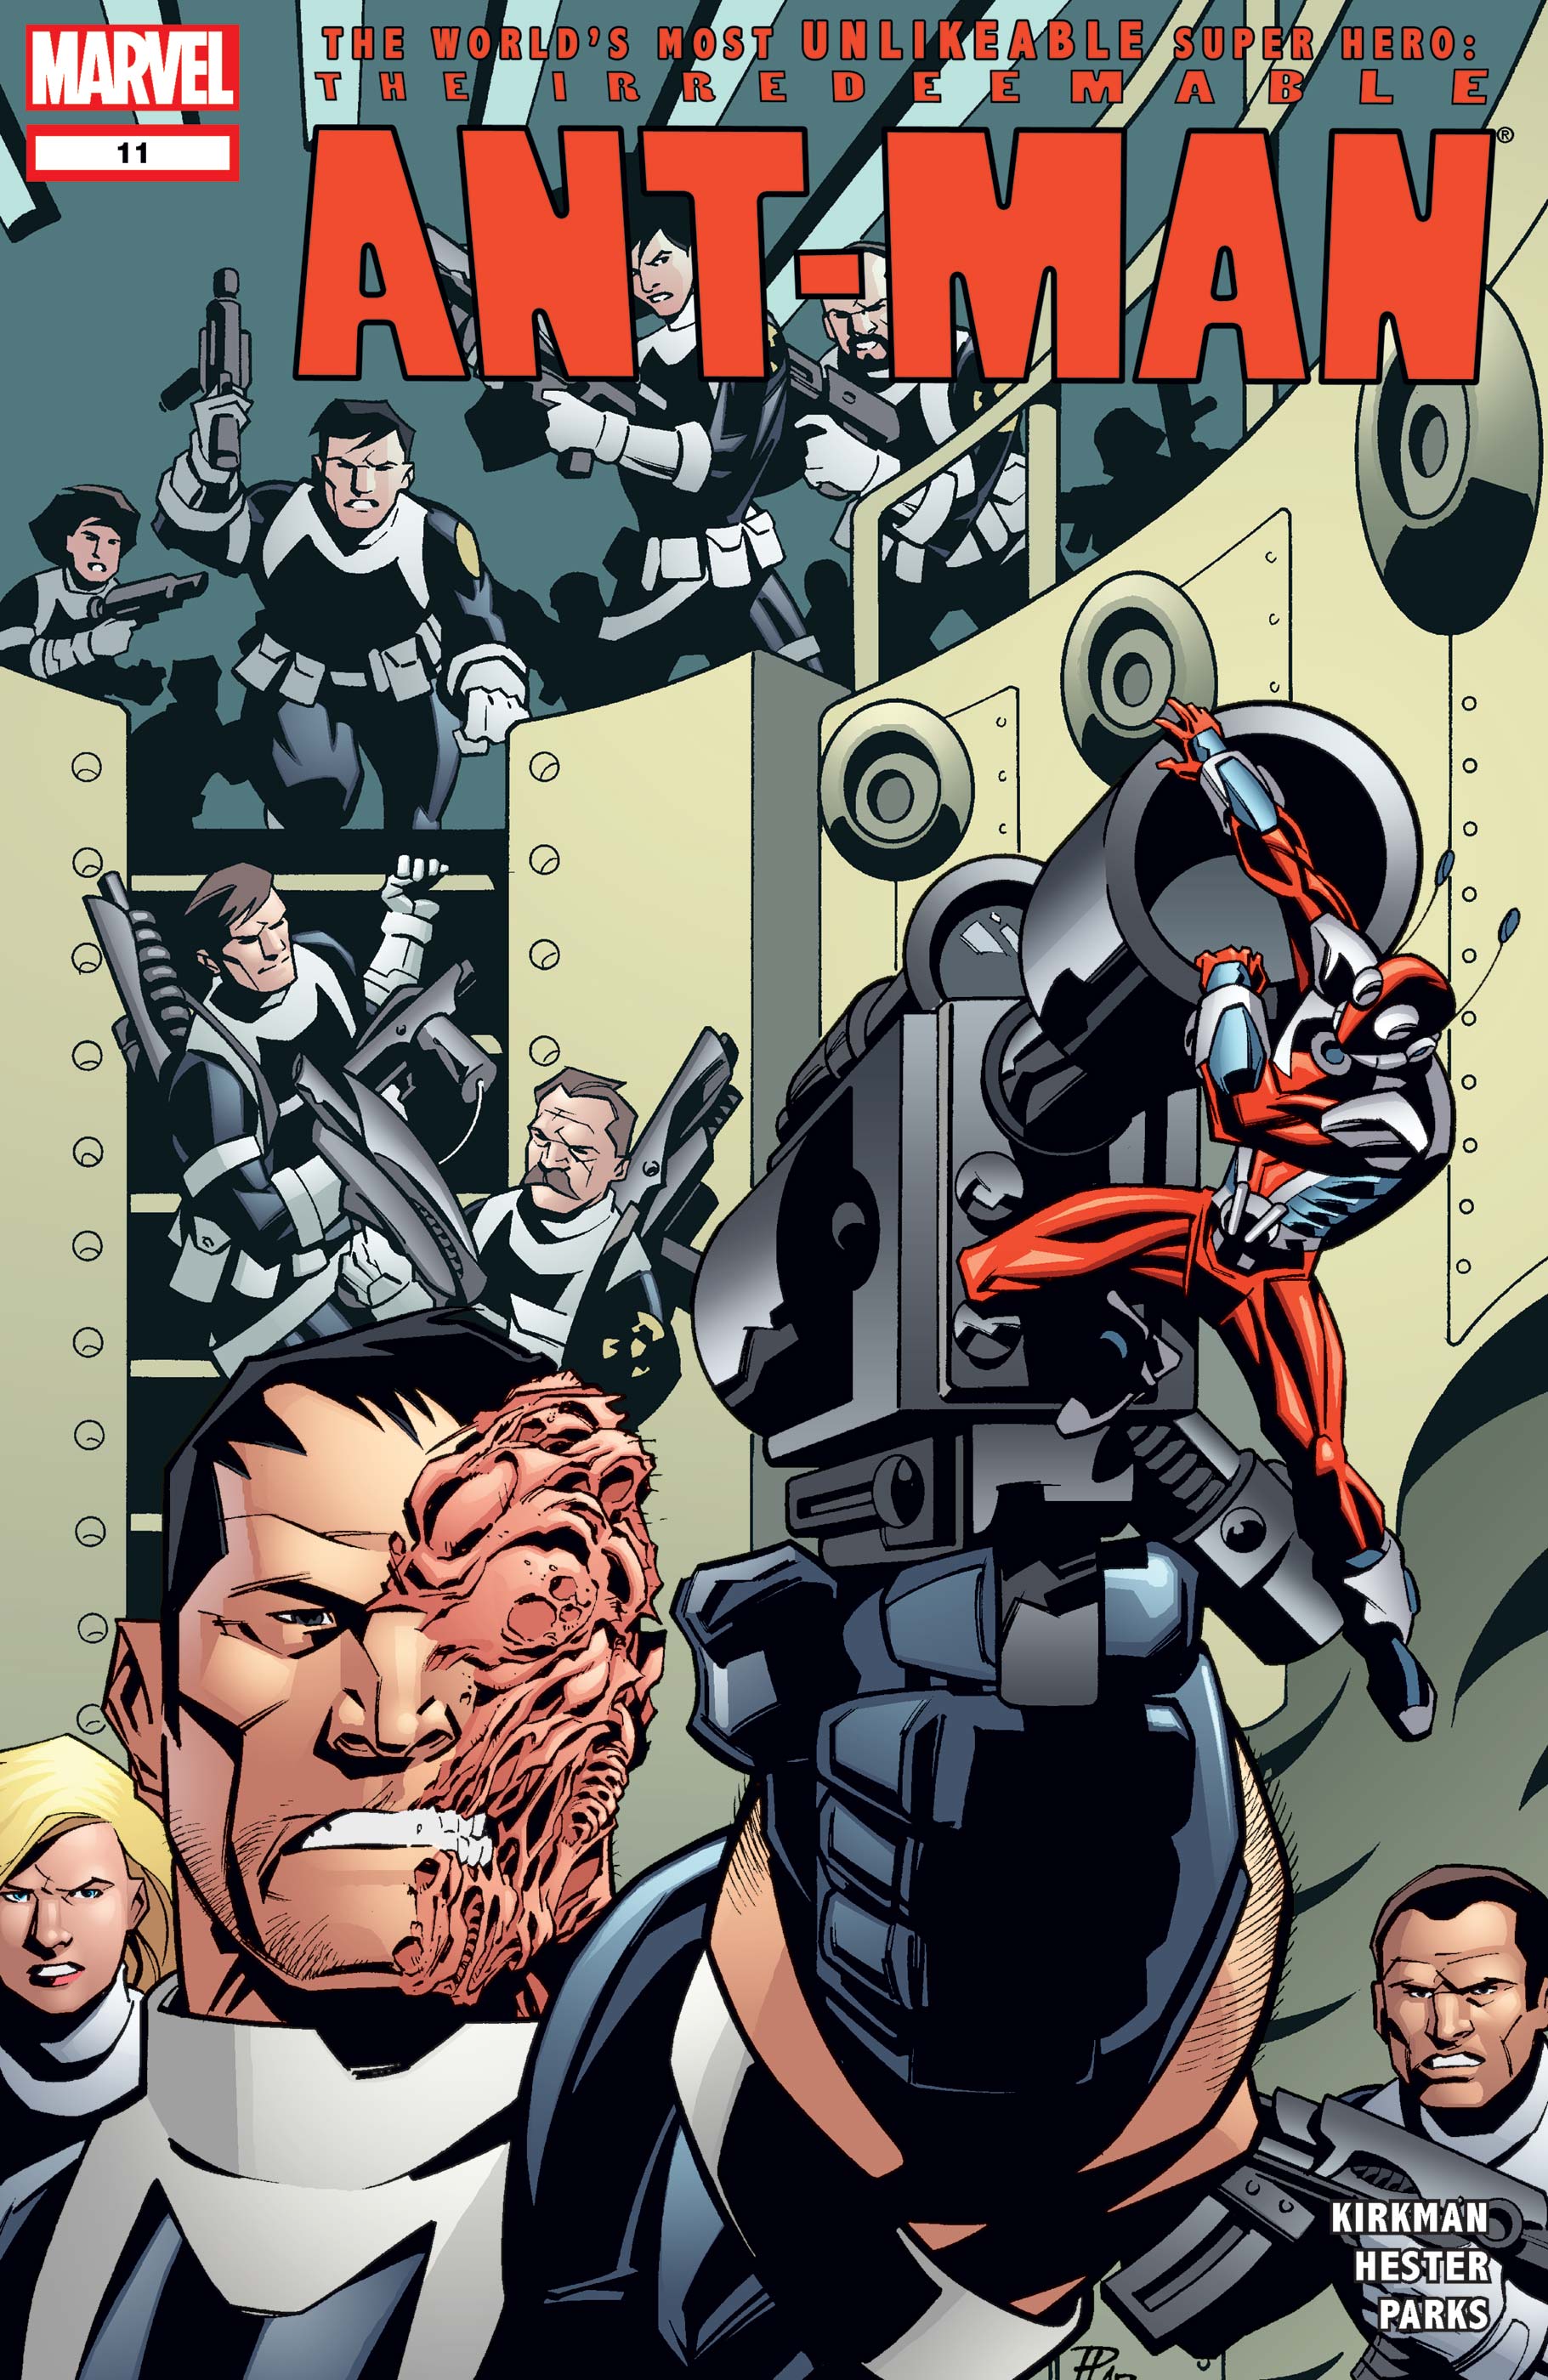 Irredeemable Ant-Man (2006) #11